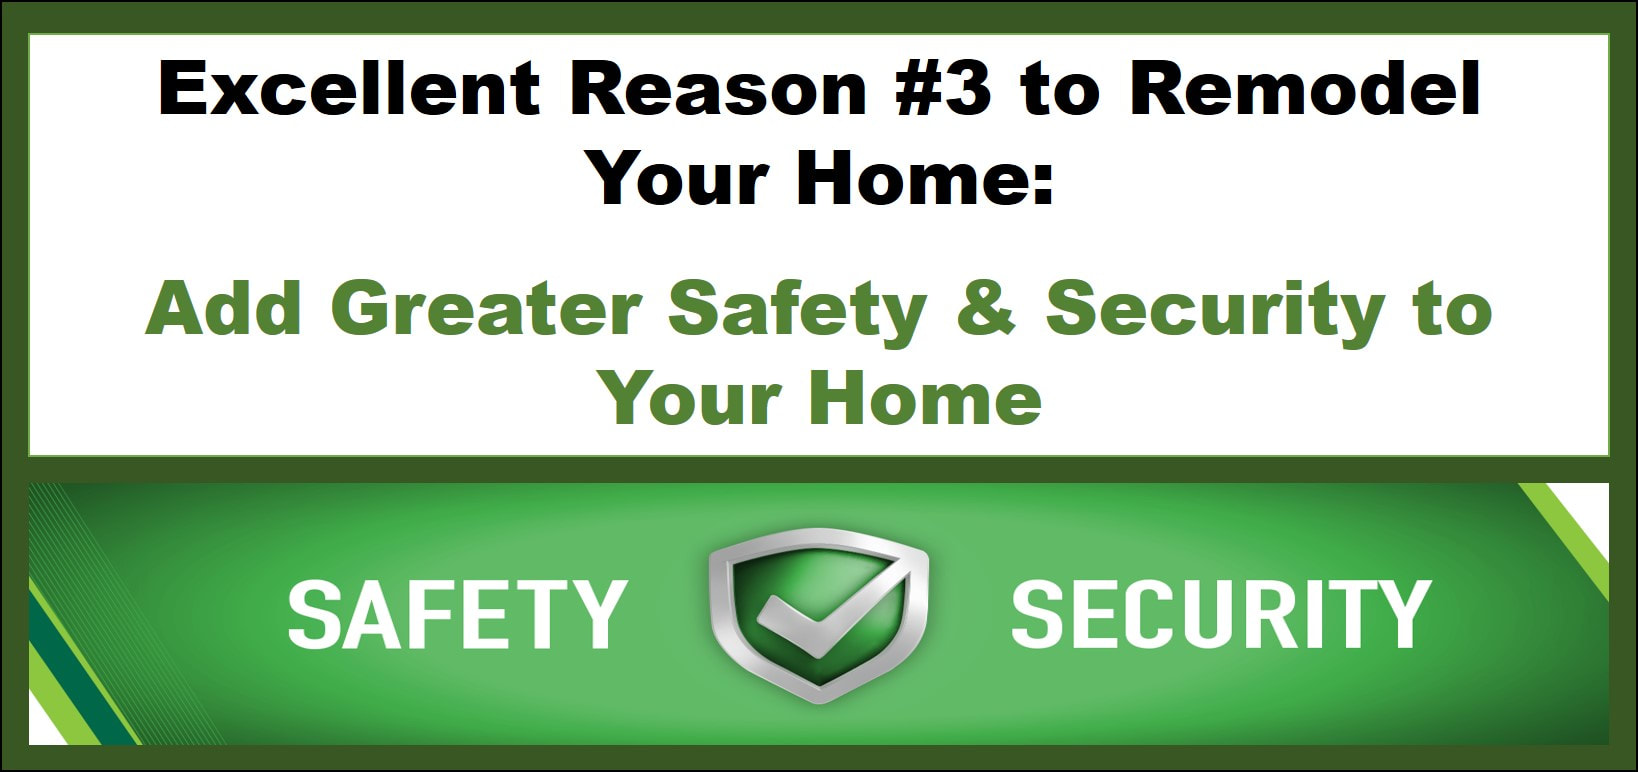 Excellent Reason to Remodel - Safety and Security